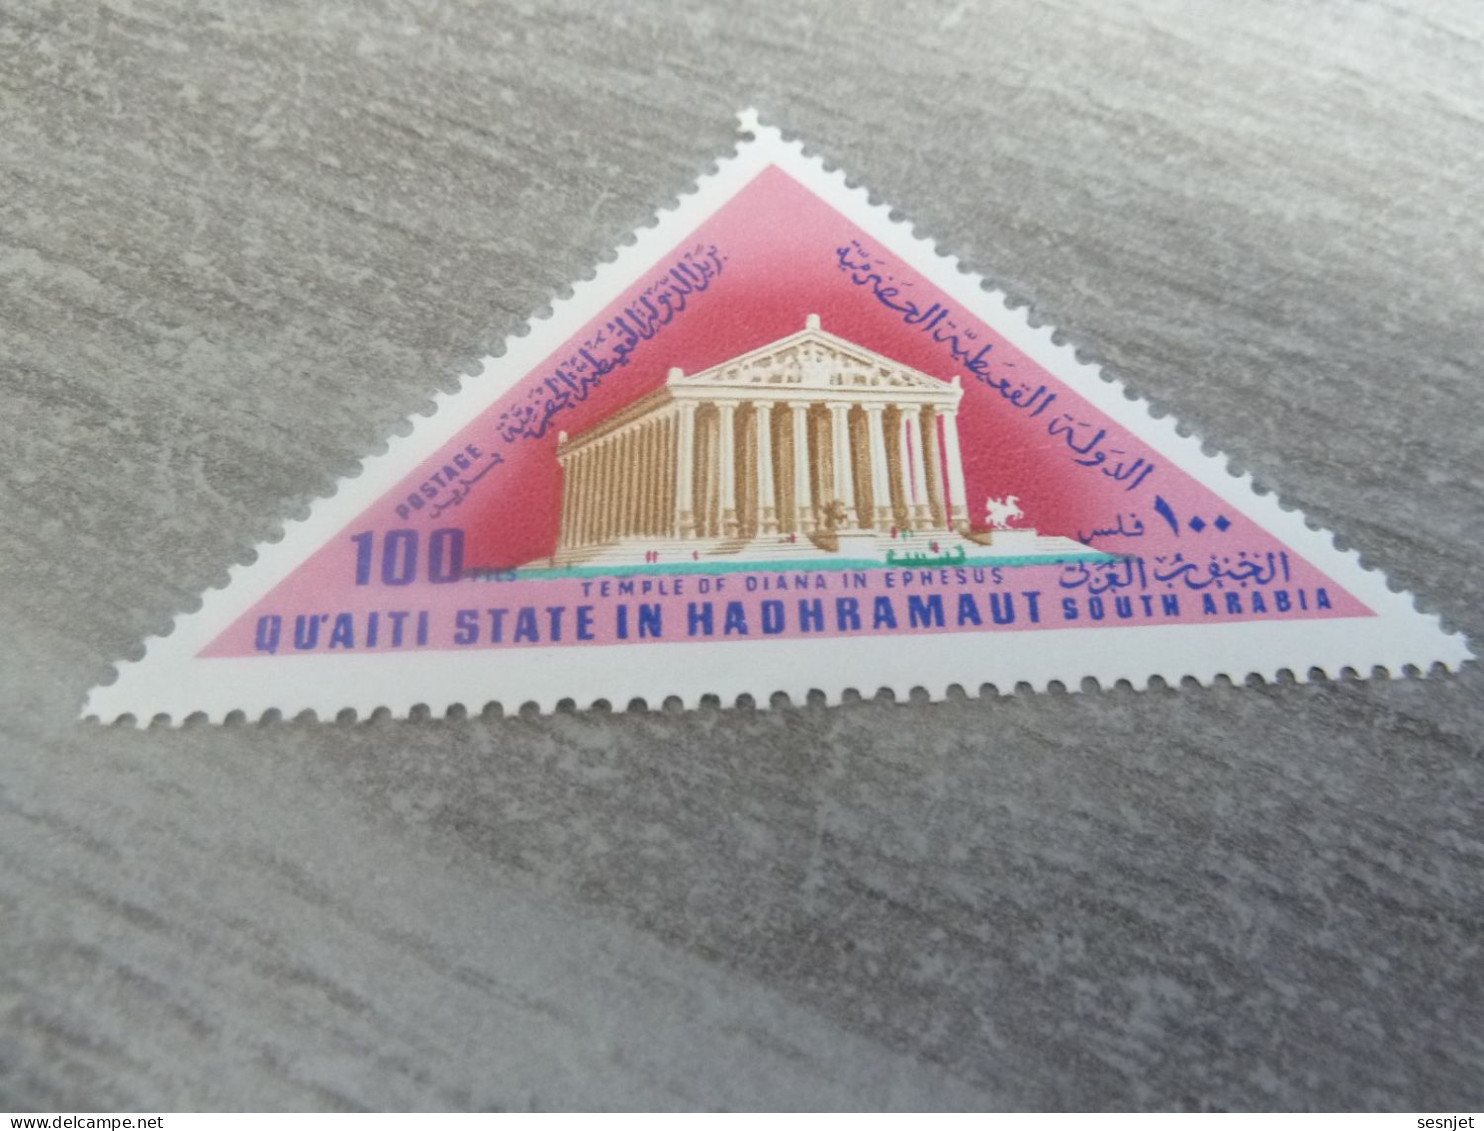 Qu'aiti State In Hadhramaut - Temple Of Diana In Ephesus - Val 100 Fils - Postage - Multicolore - Neuf - - Mythology